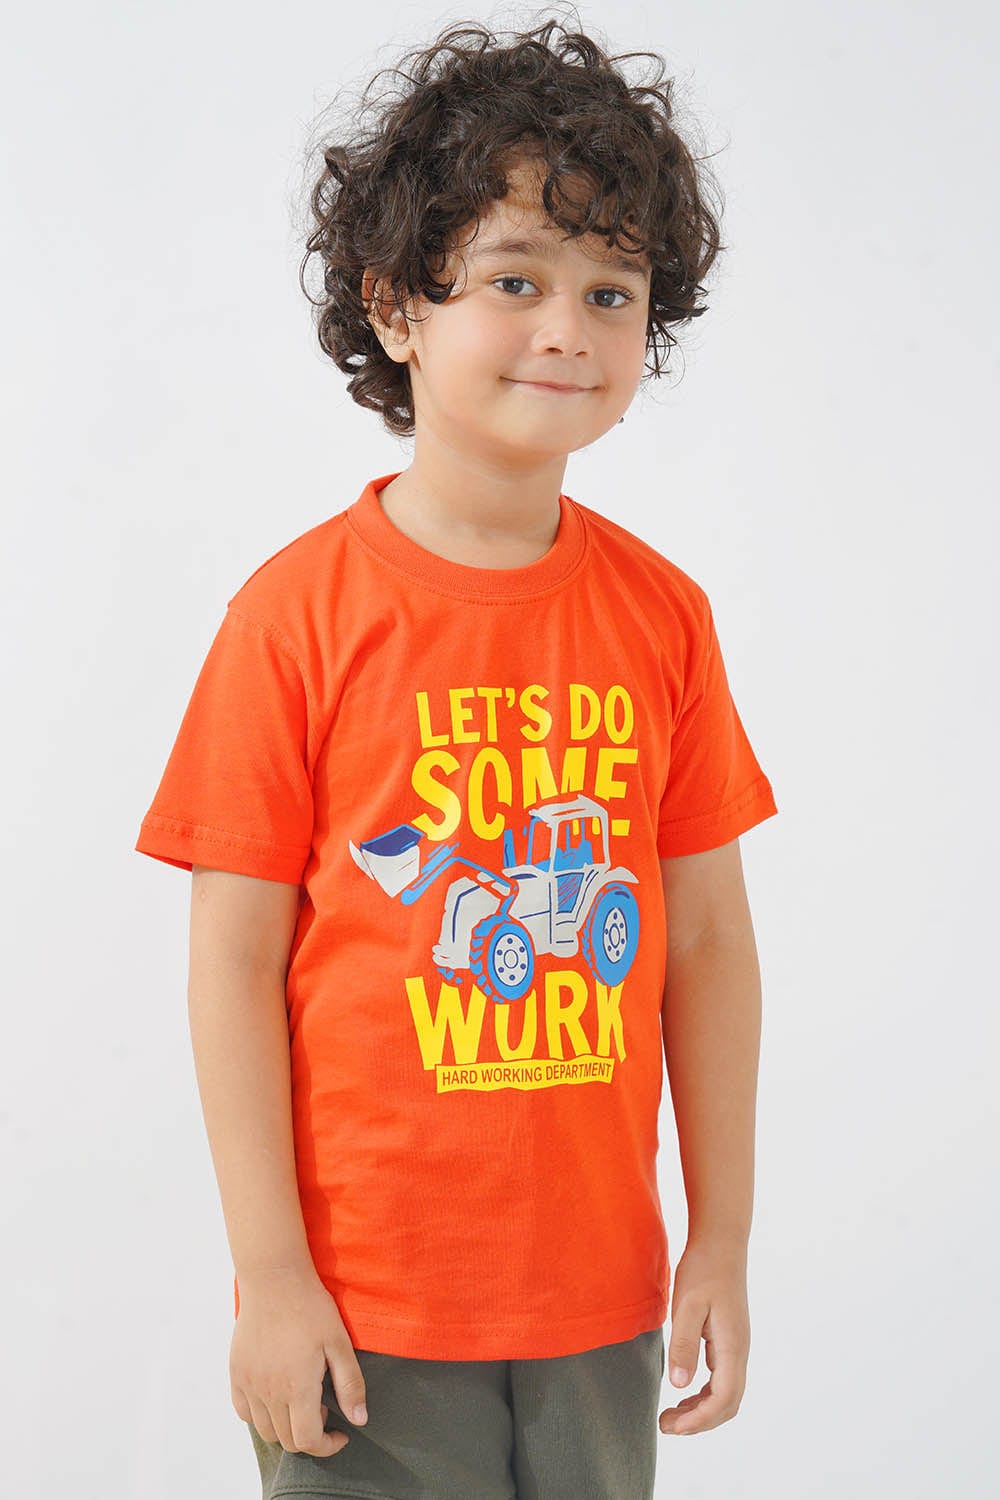 Hope Not Out by Shahid Afridi Boys Knit T-Shirt Graphic T-Shirt